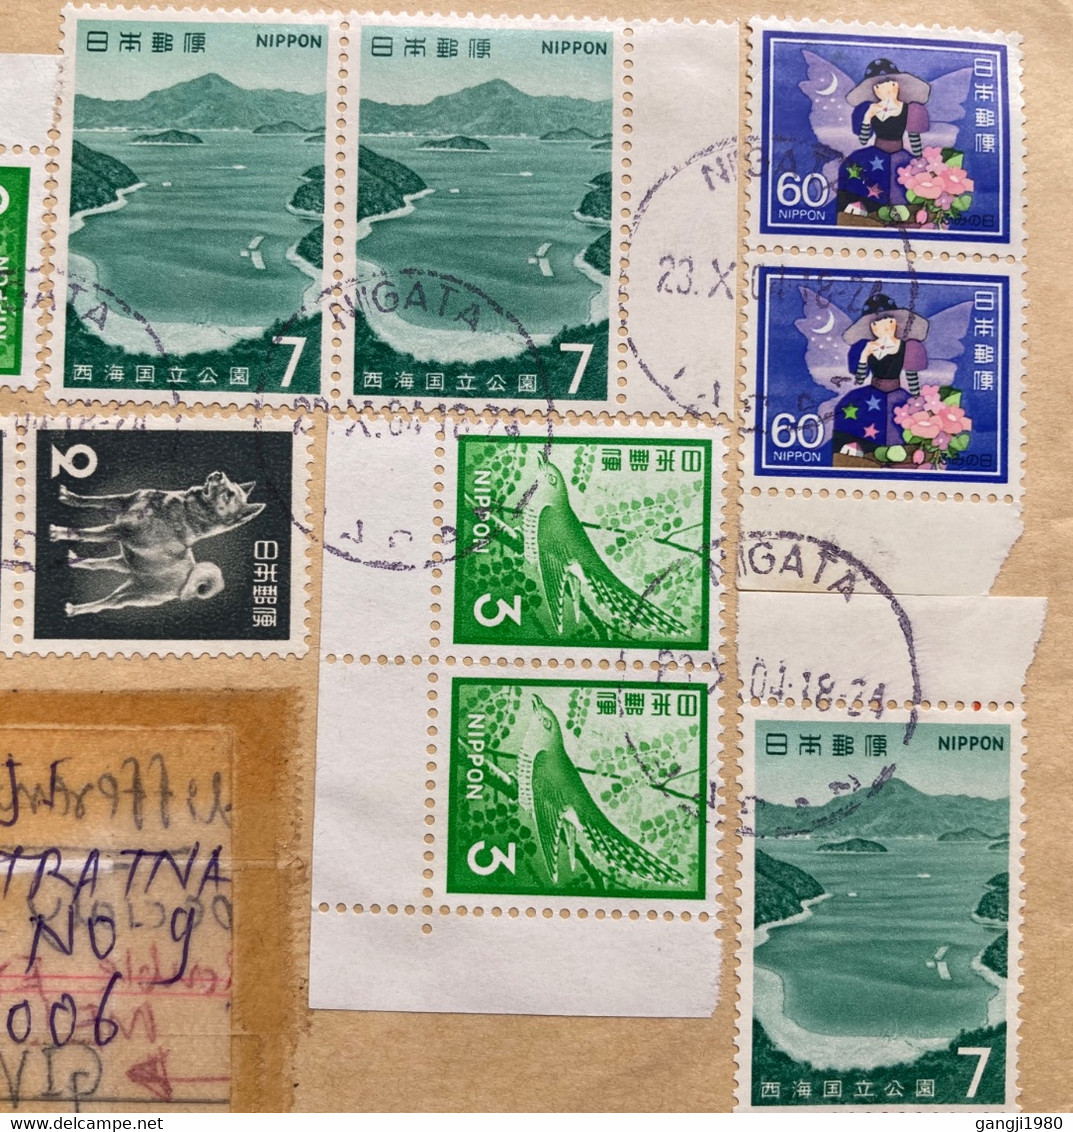 JAPAN 2004, WATER,RIVER,MOUNTAIN,NATURE,DOG,BIRD,COUNCH SHELL BEAUTY QUEEN,FAIRY 12 STAMPS USED COVER TO INDIA - Briefe U. Dokumente